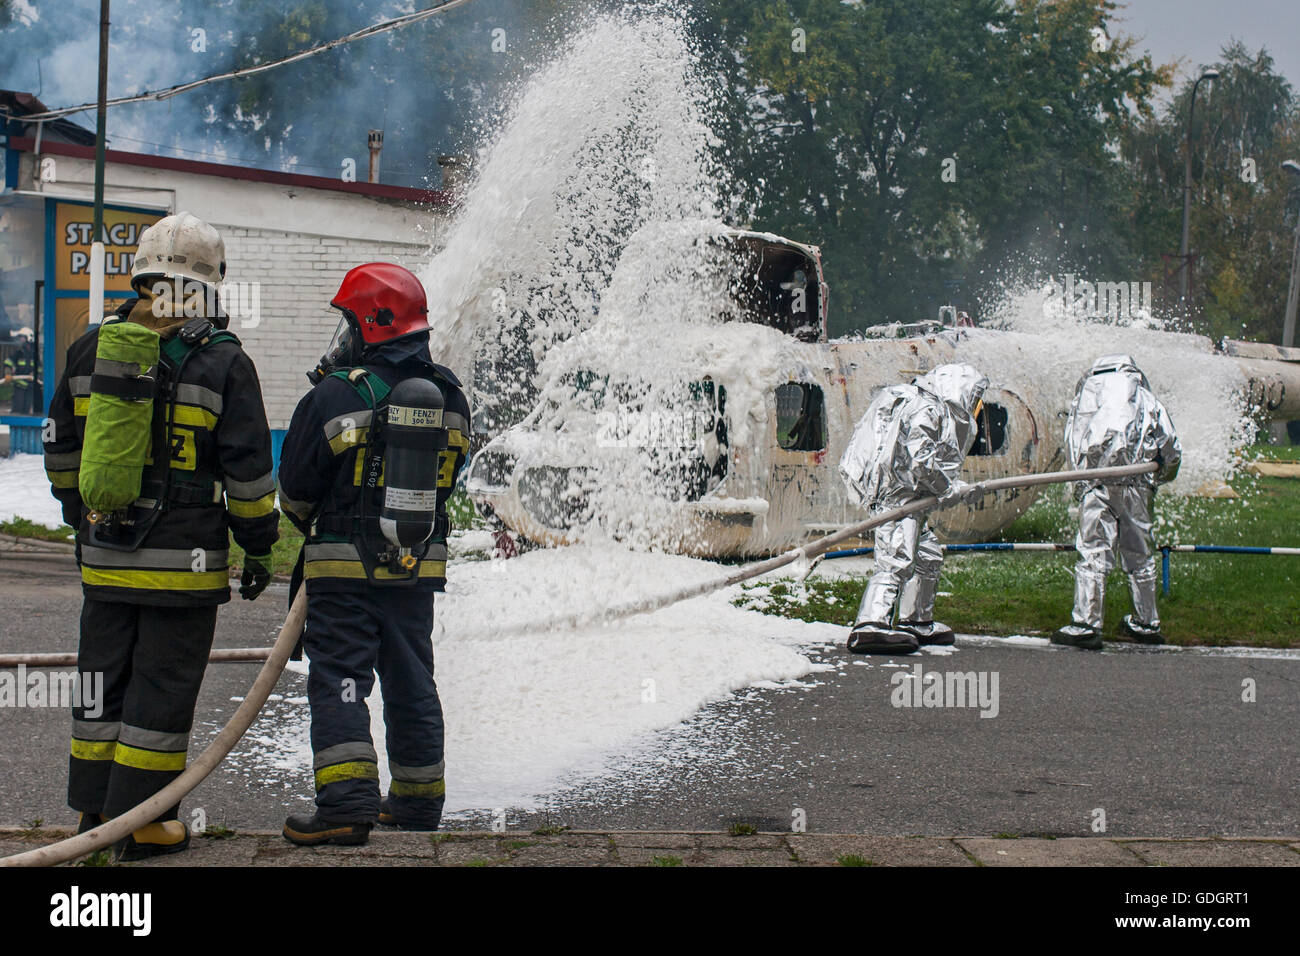 Polish firemen covering foam over the wreck of a helicopter during exercise Stock Photo